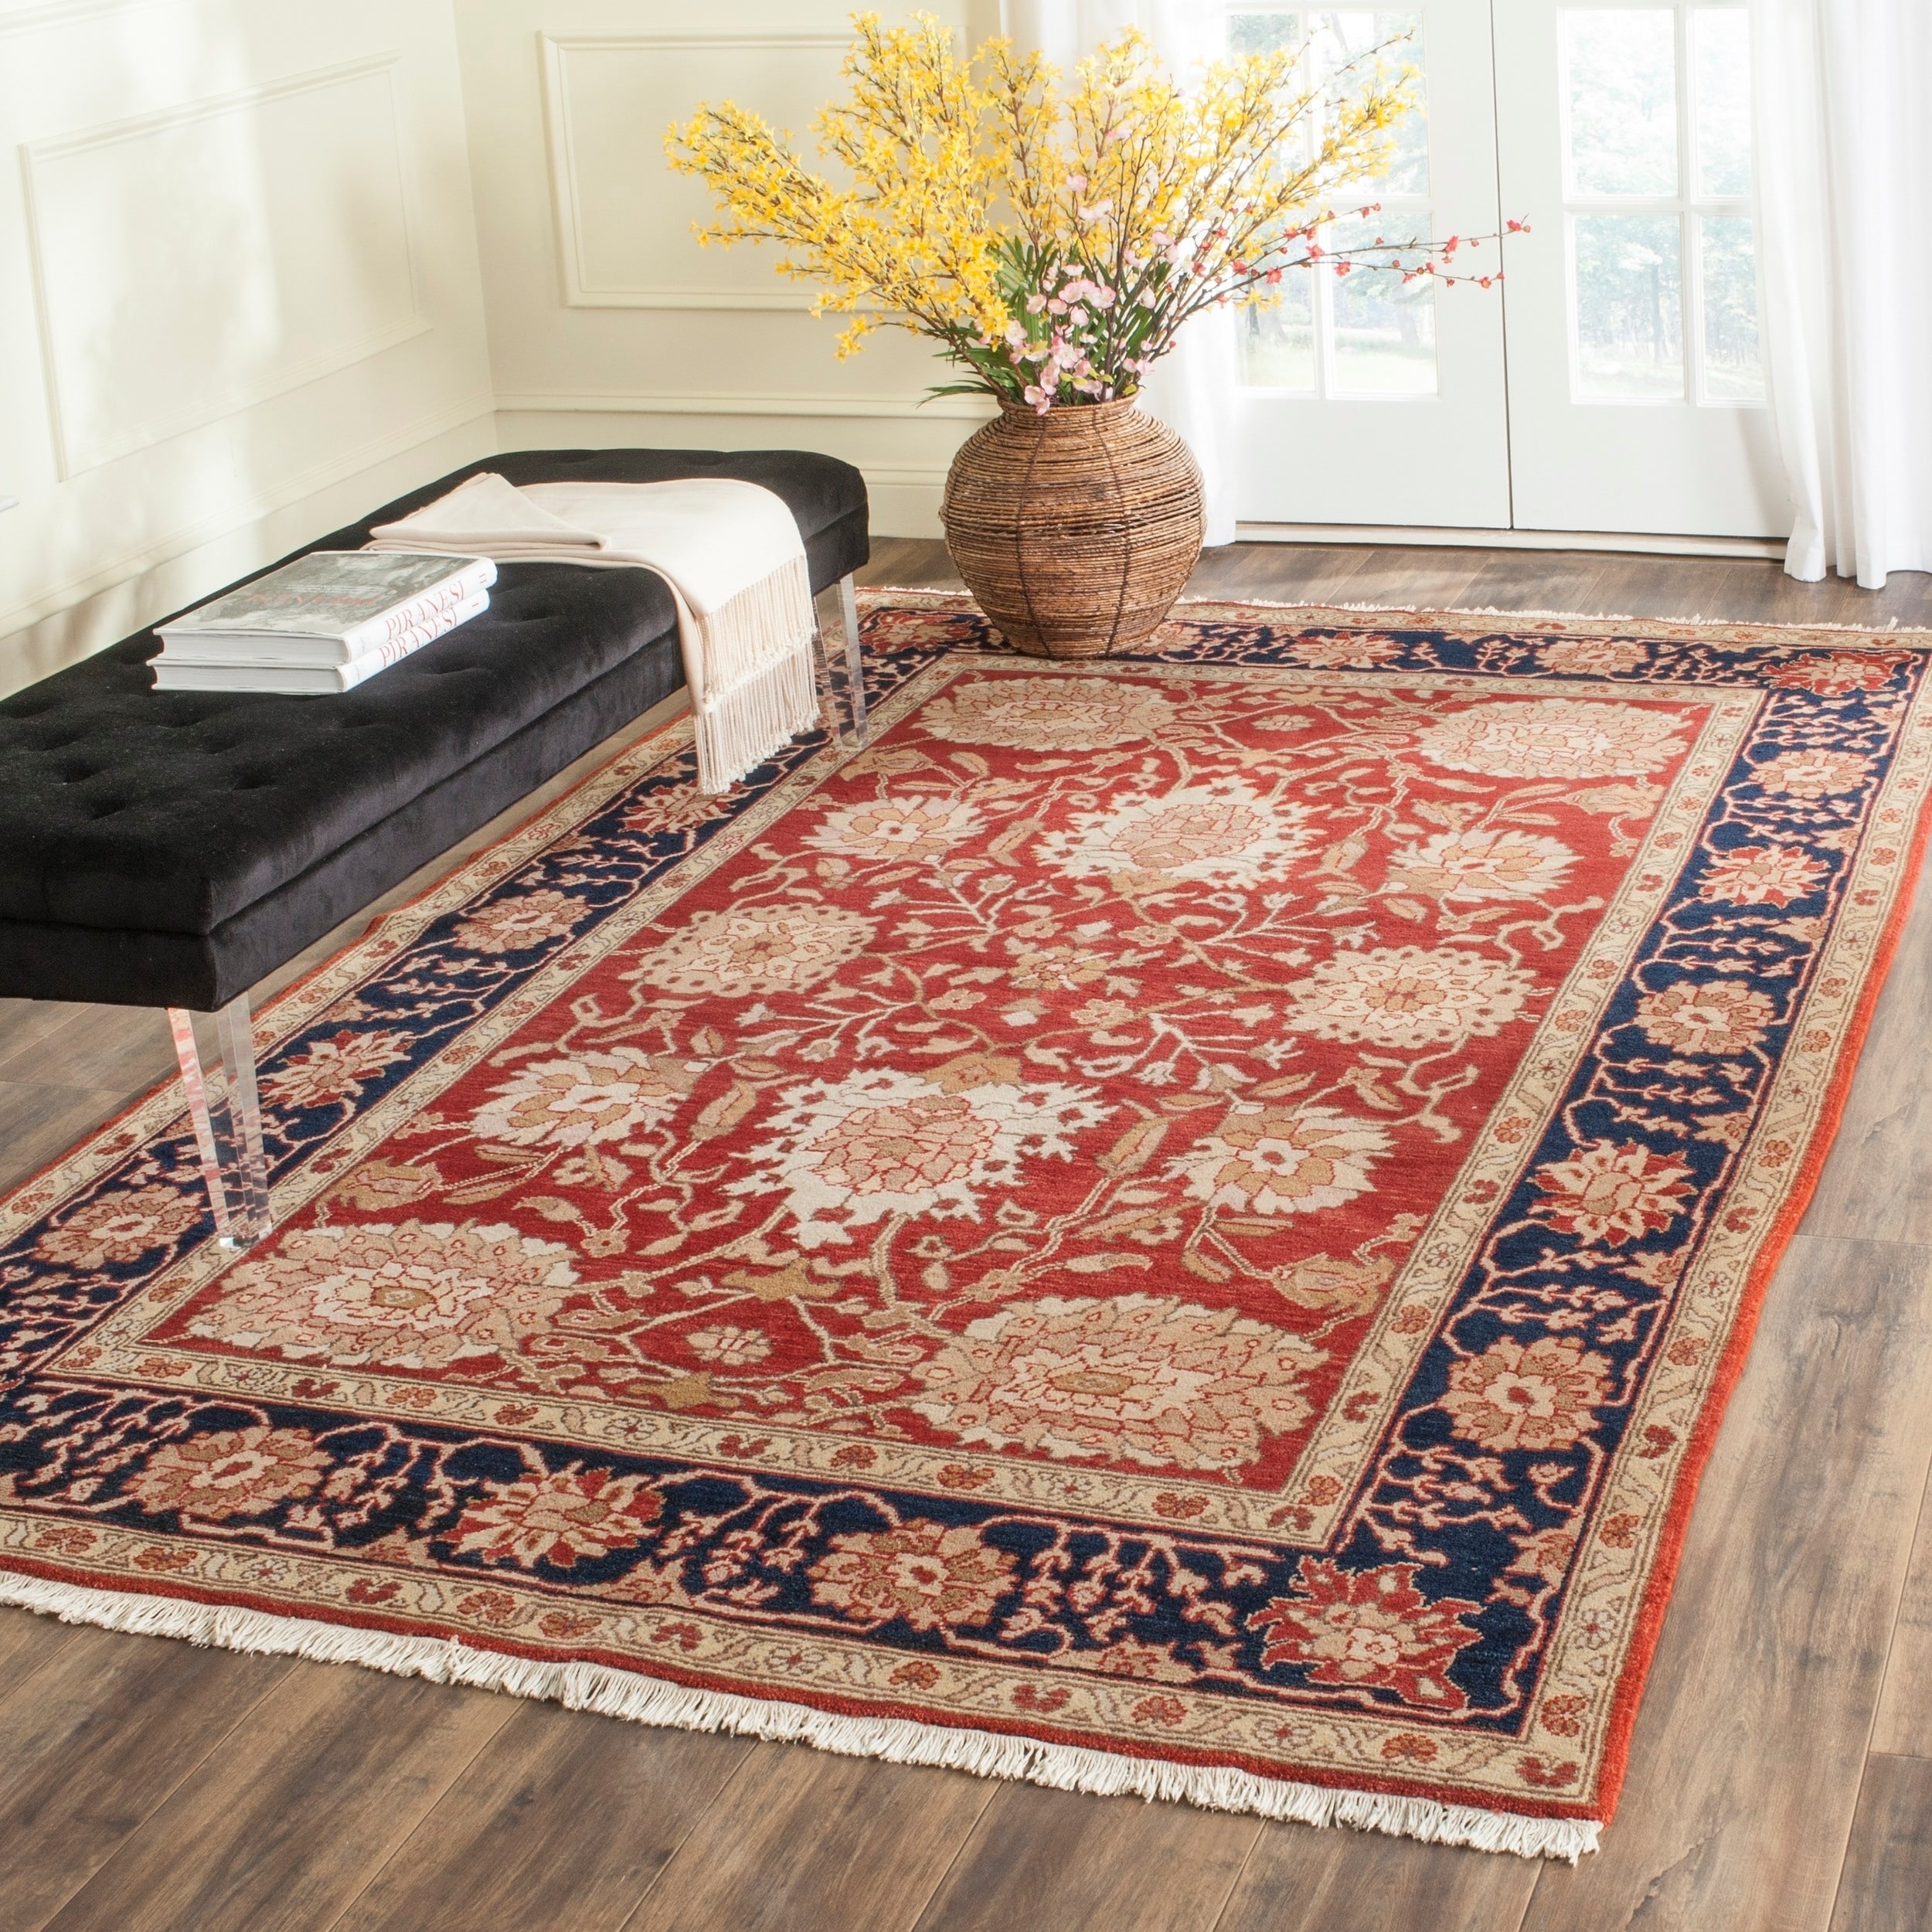 https://ak1.ostkcdn.com/images/products/4342485/Oushak-Legacy-Hand-knotted-Mahal-Ivory-Red-Wool-Rug-8-x-10-8-x-10-3e4bfe38-5d55-49ed-a637-905b3b1444a1.jpg